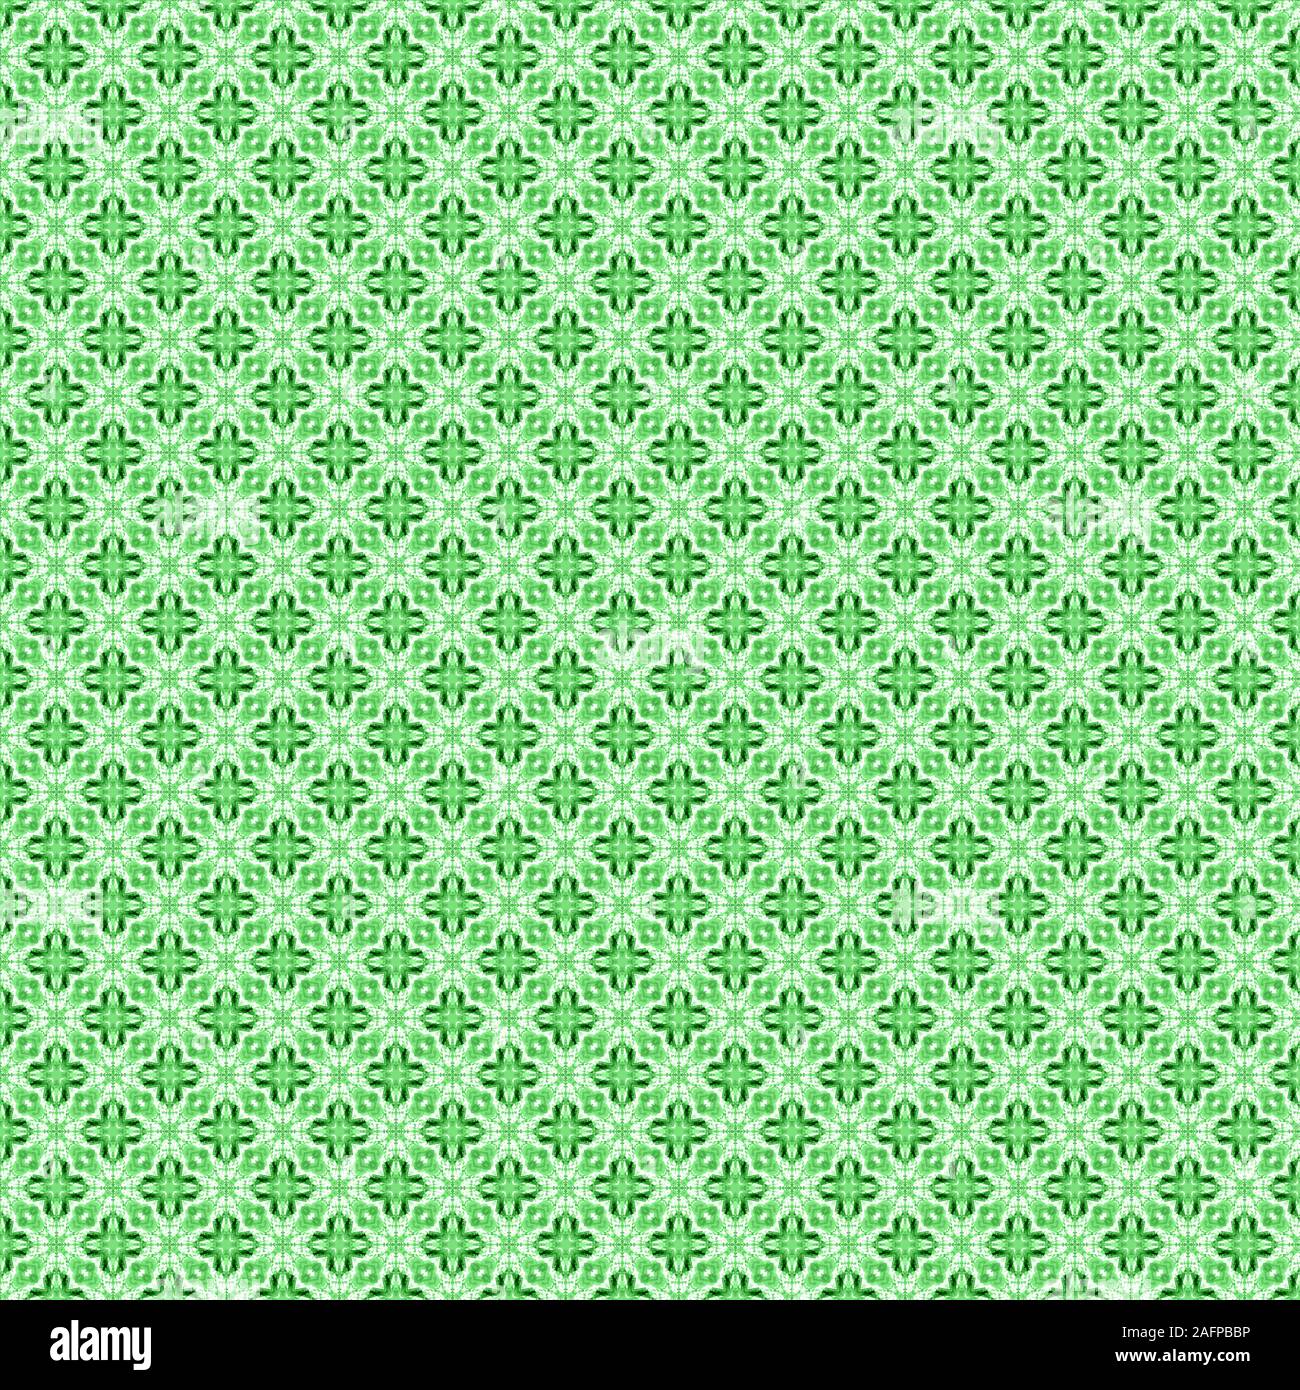 Seamless pattern background in green for Christmas holiday, also springtime Stock Photo